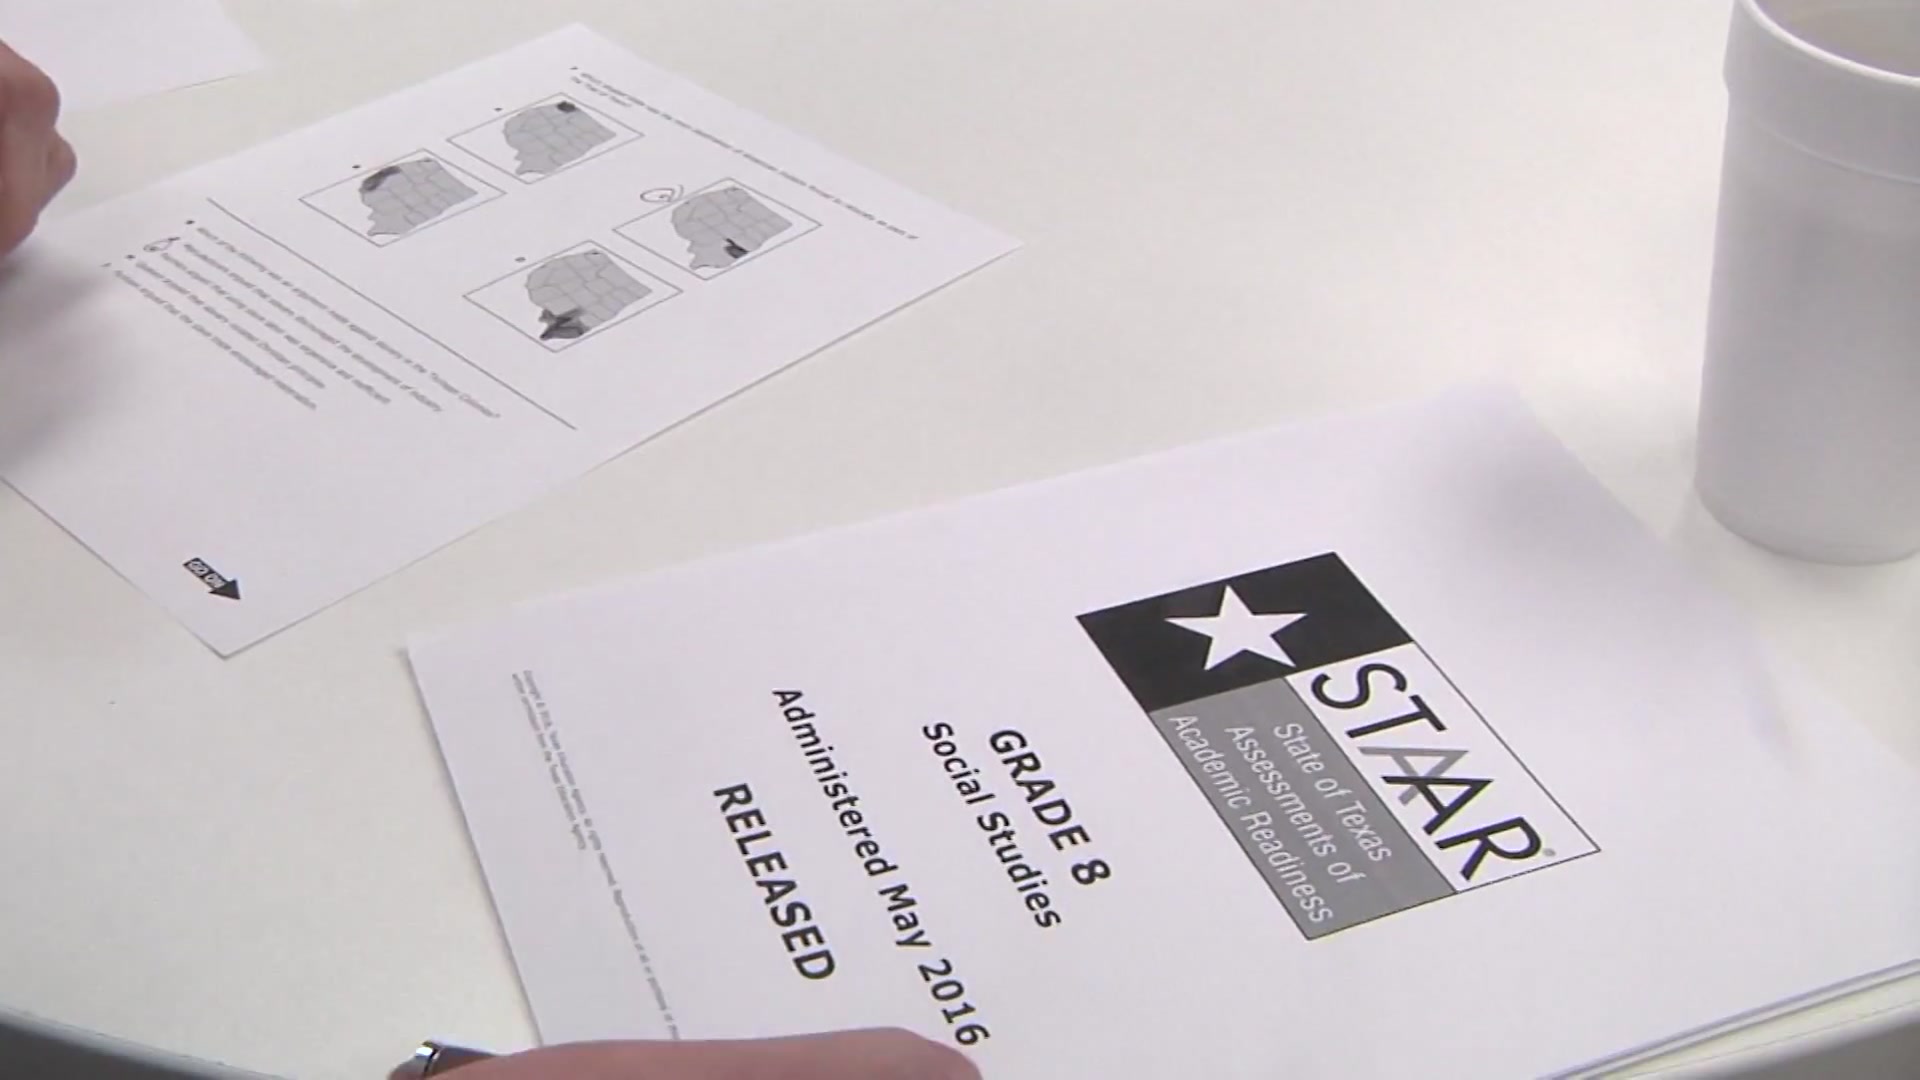 Widespread Issues Reported With Online Staar Testing Nbc 5 Dallas Fort Worth